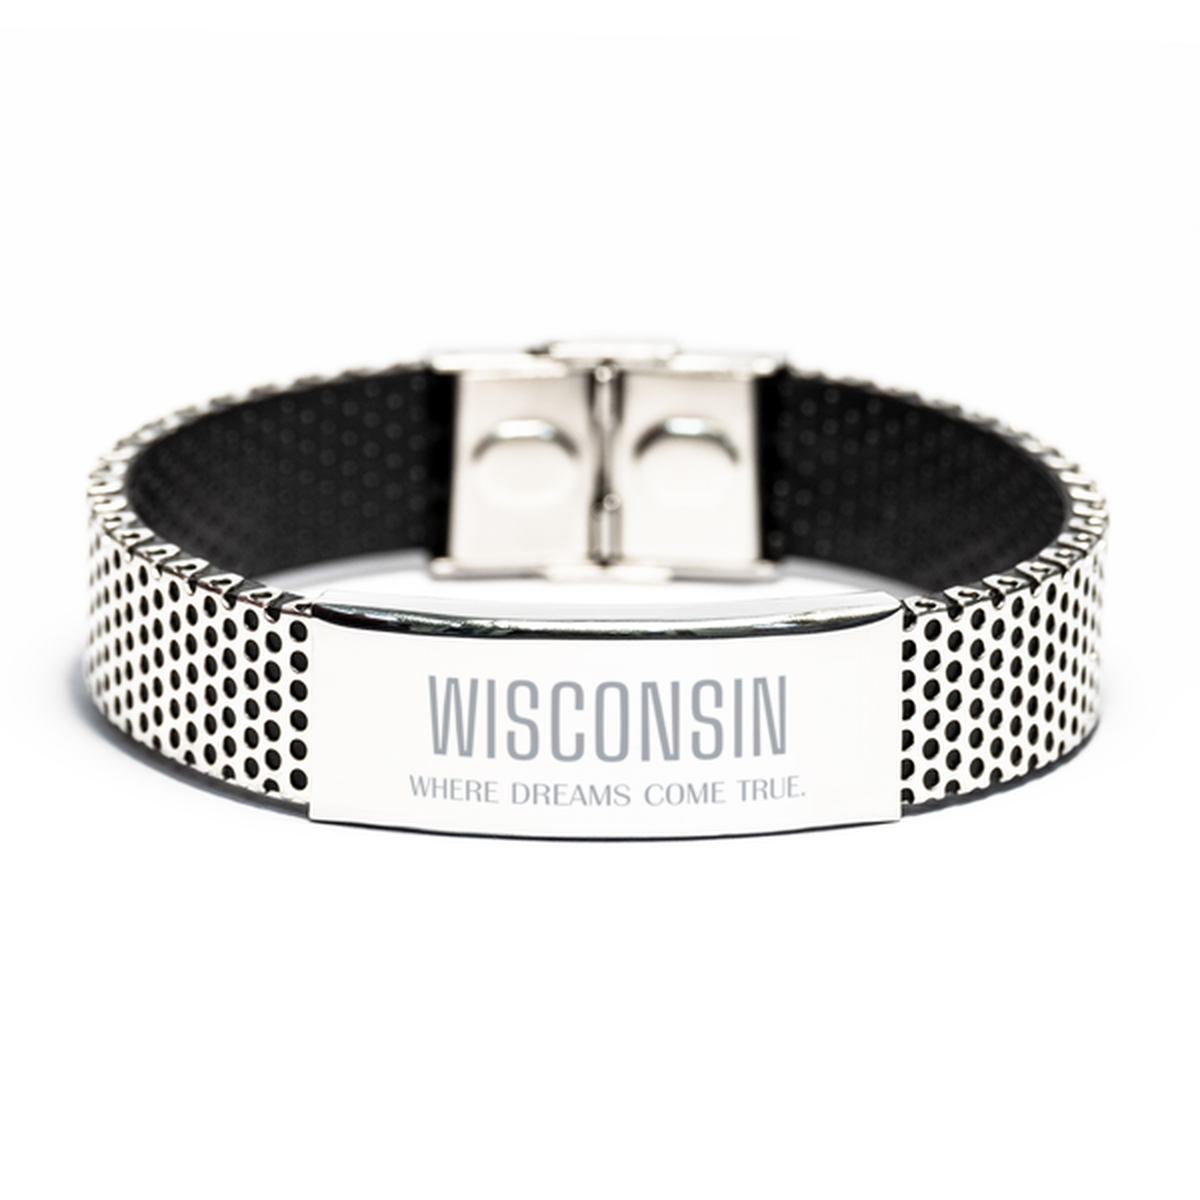 Love Wisconsin State Stainless Steel Bracelet, Wisconsin Where dreams come true, Birthday Inspirational Gifts For Wisconsin Men, Women, Friends